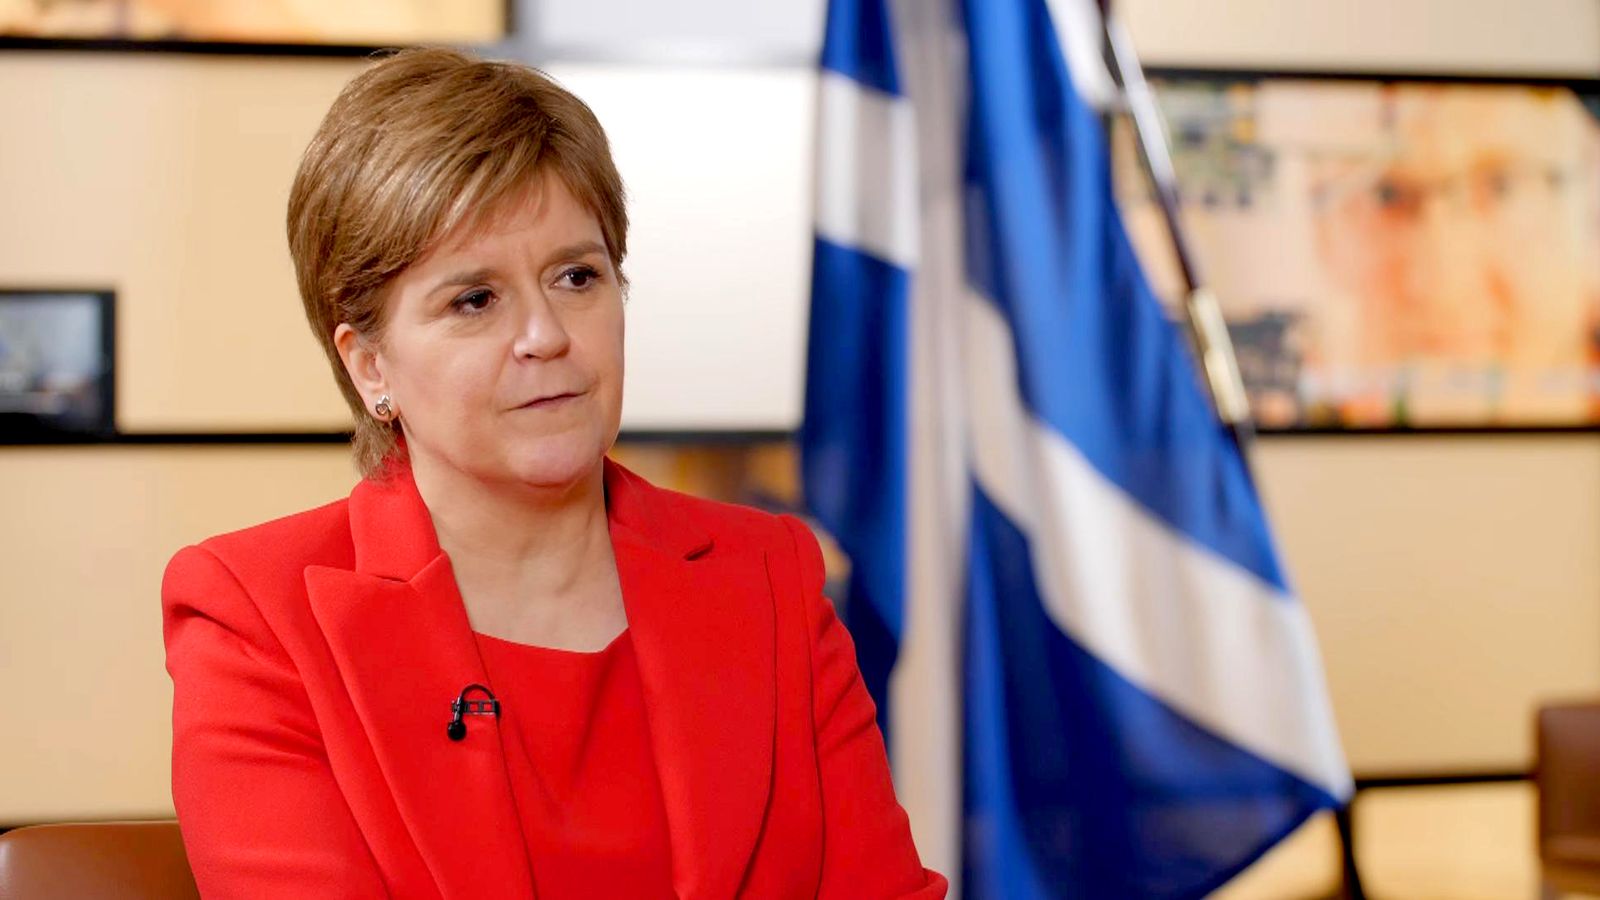 Sturgeon says leadership contest has been 'less than edifying' and urges candidates to 'protect ingredients of success'